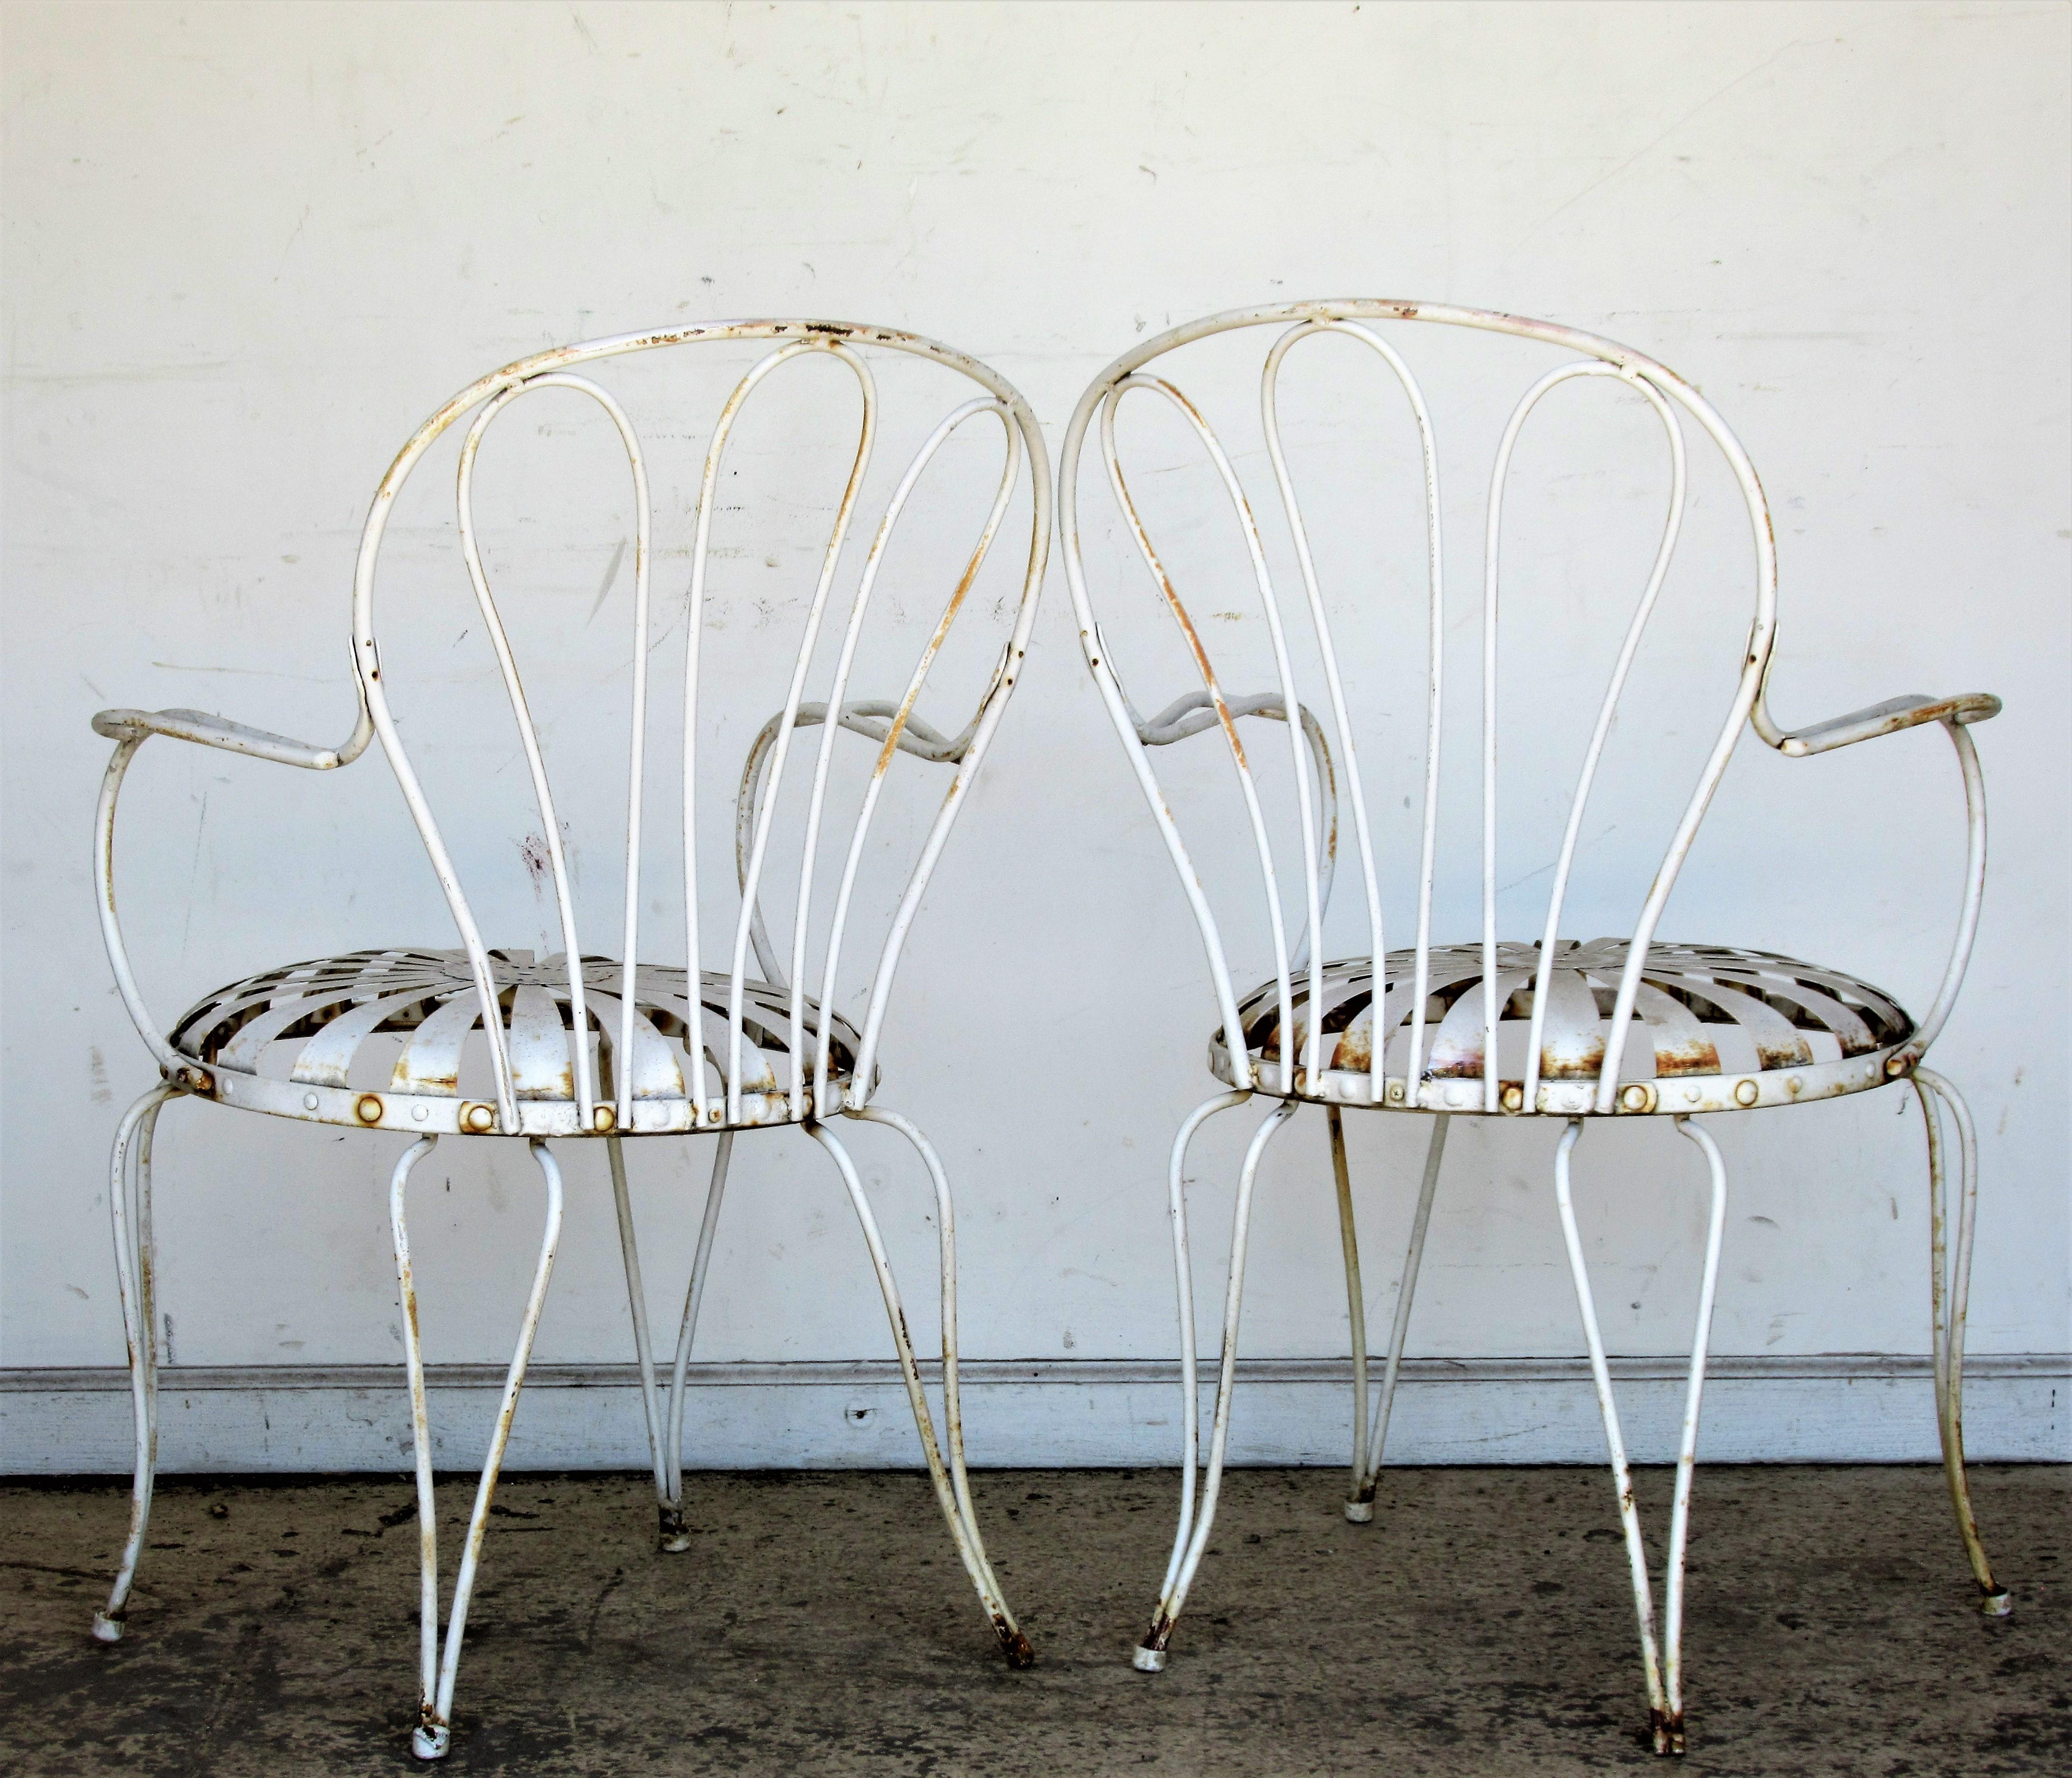 Francois Carre Iron Garden Chairs 4